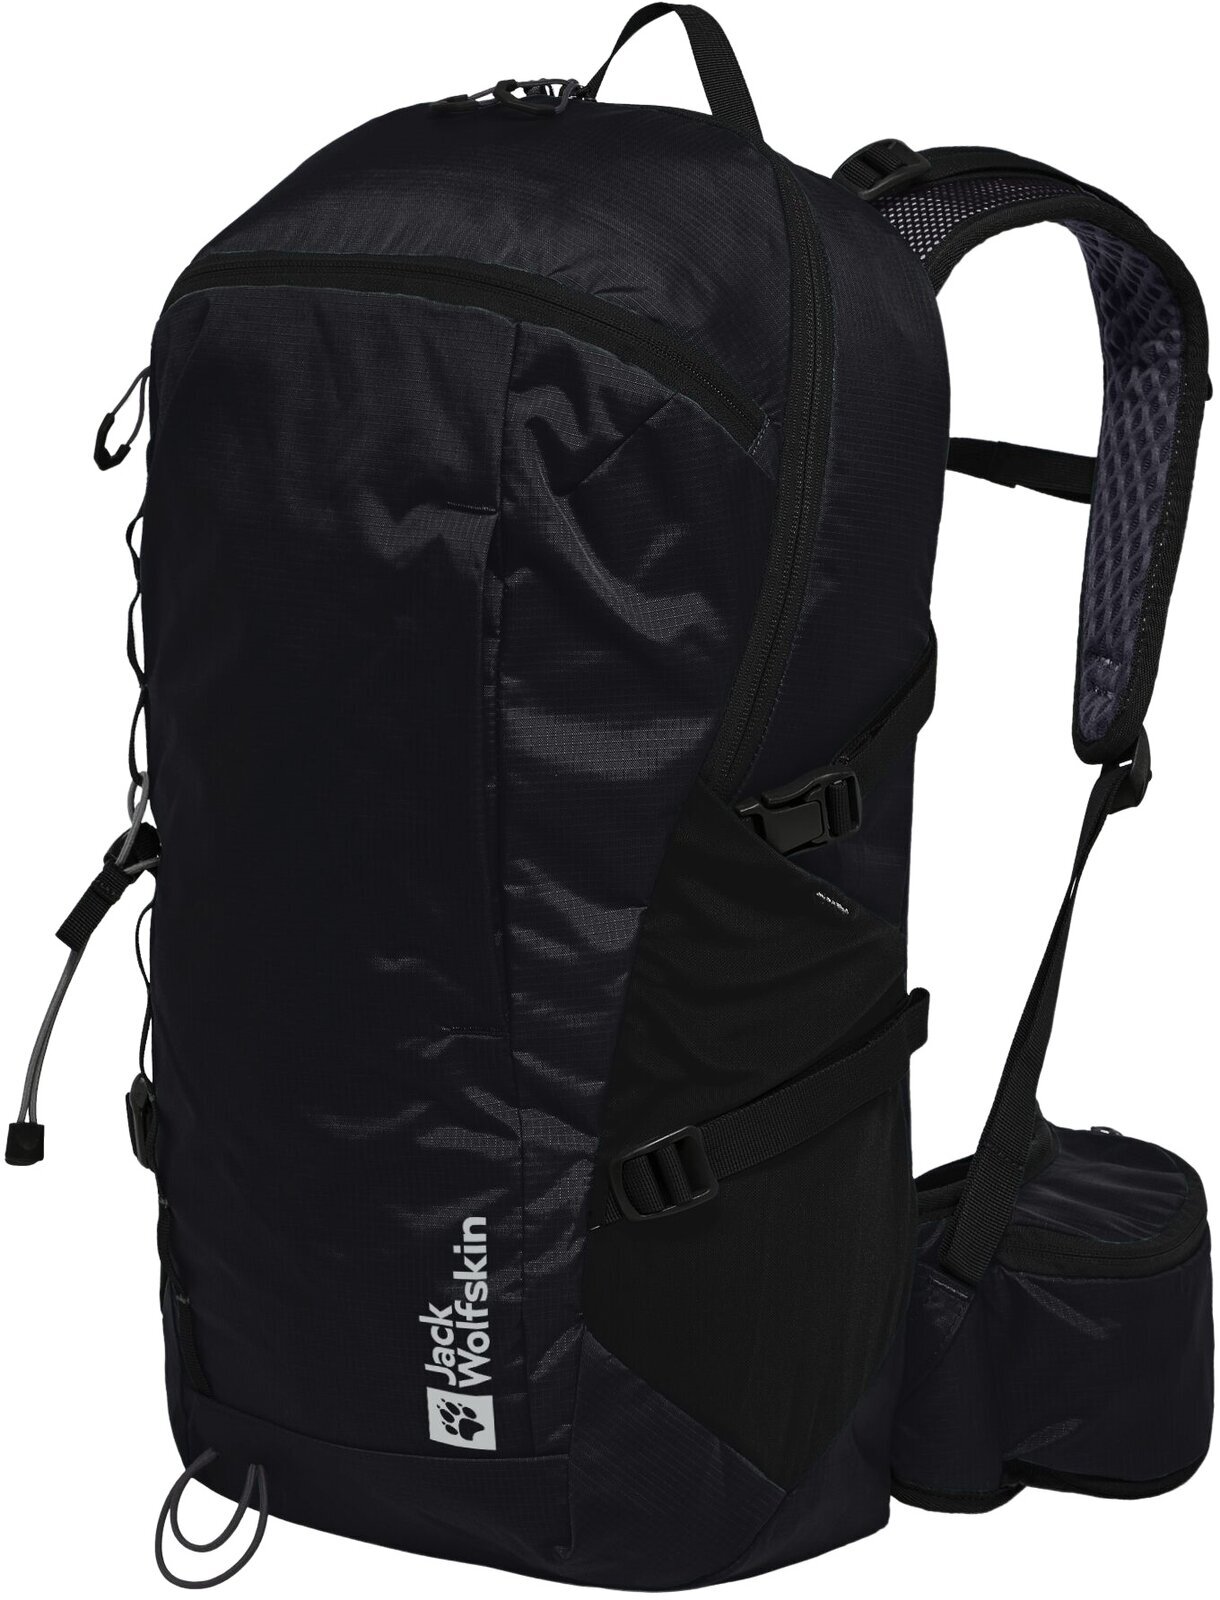 Outdoor Backpack Jack Wolfskin Cyrox Shape 25 S-L Phantom S-L Outdoor Backpack